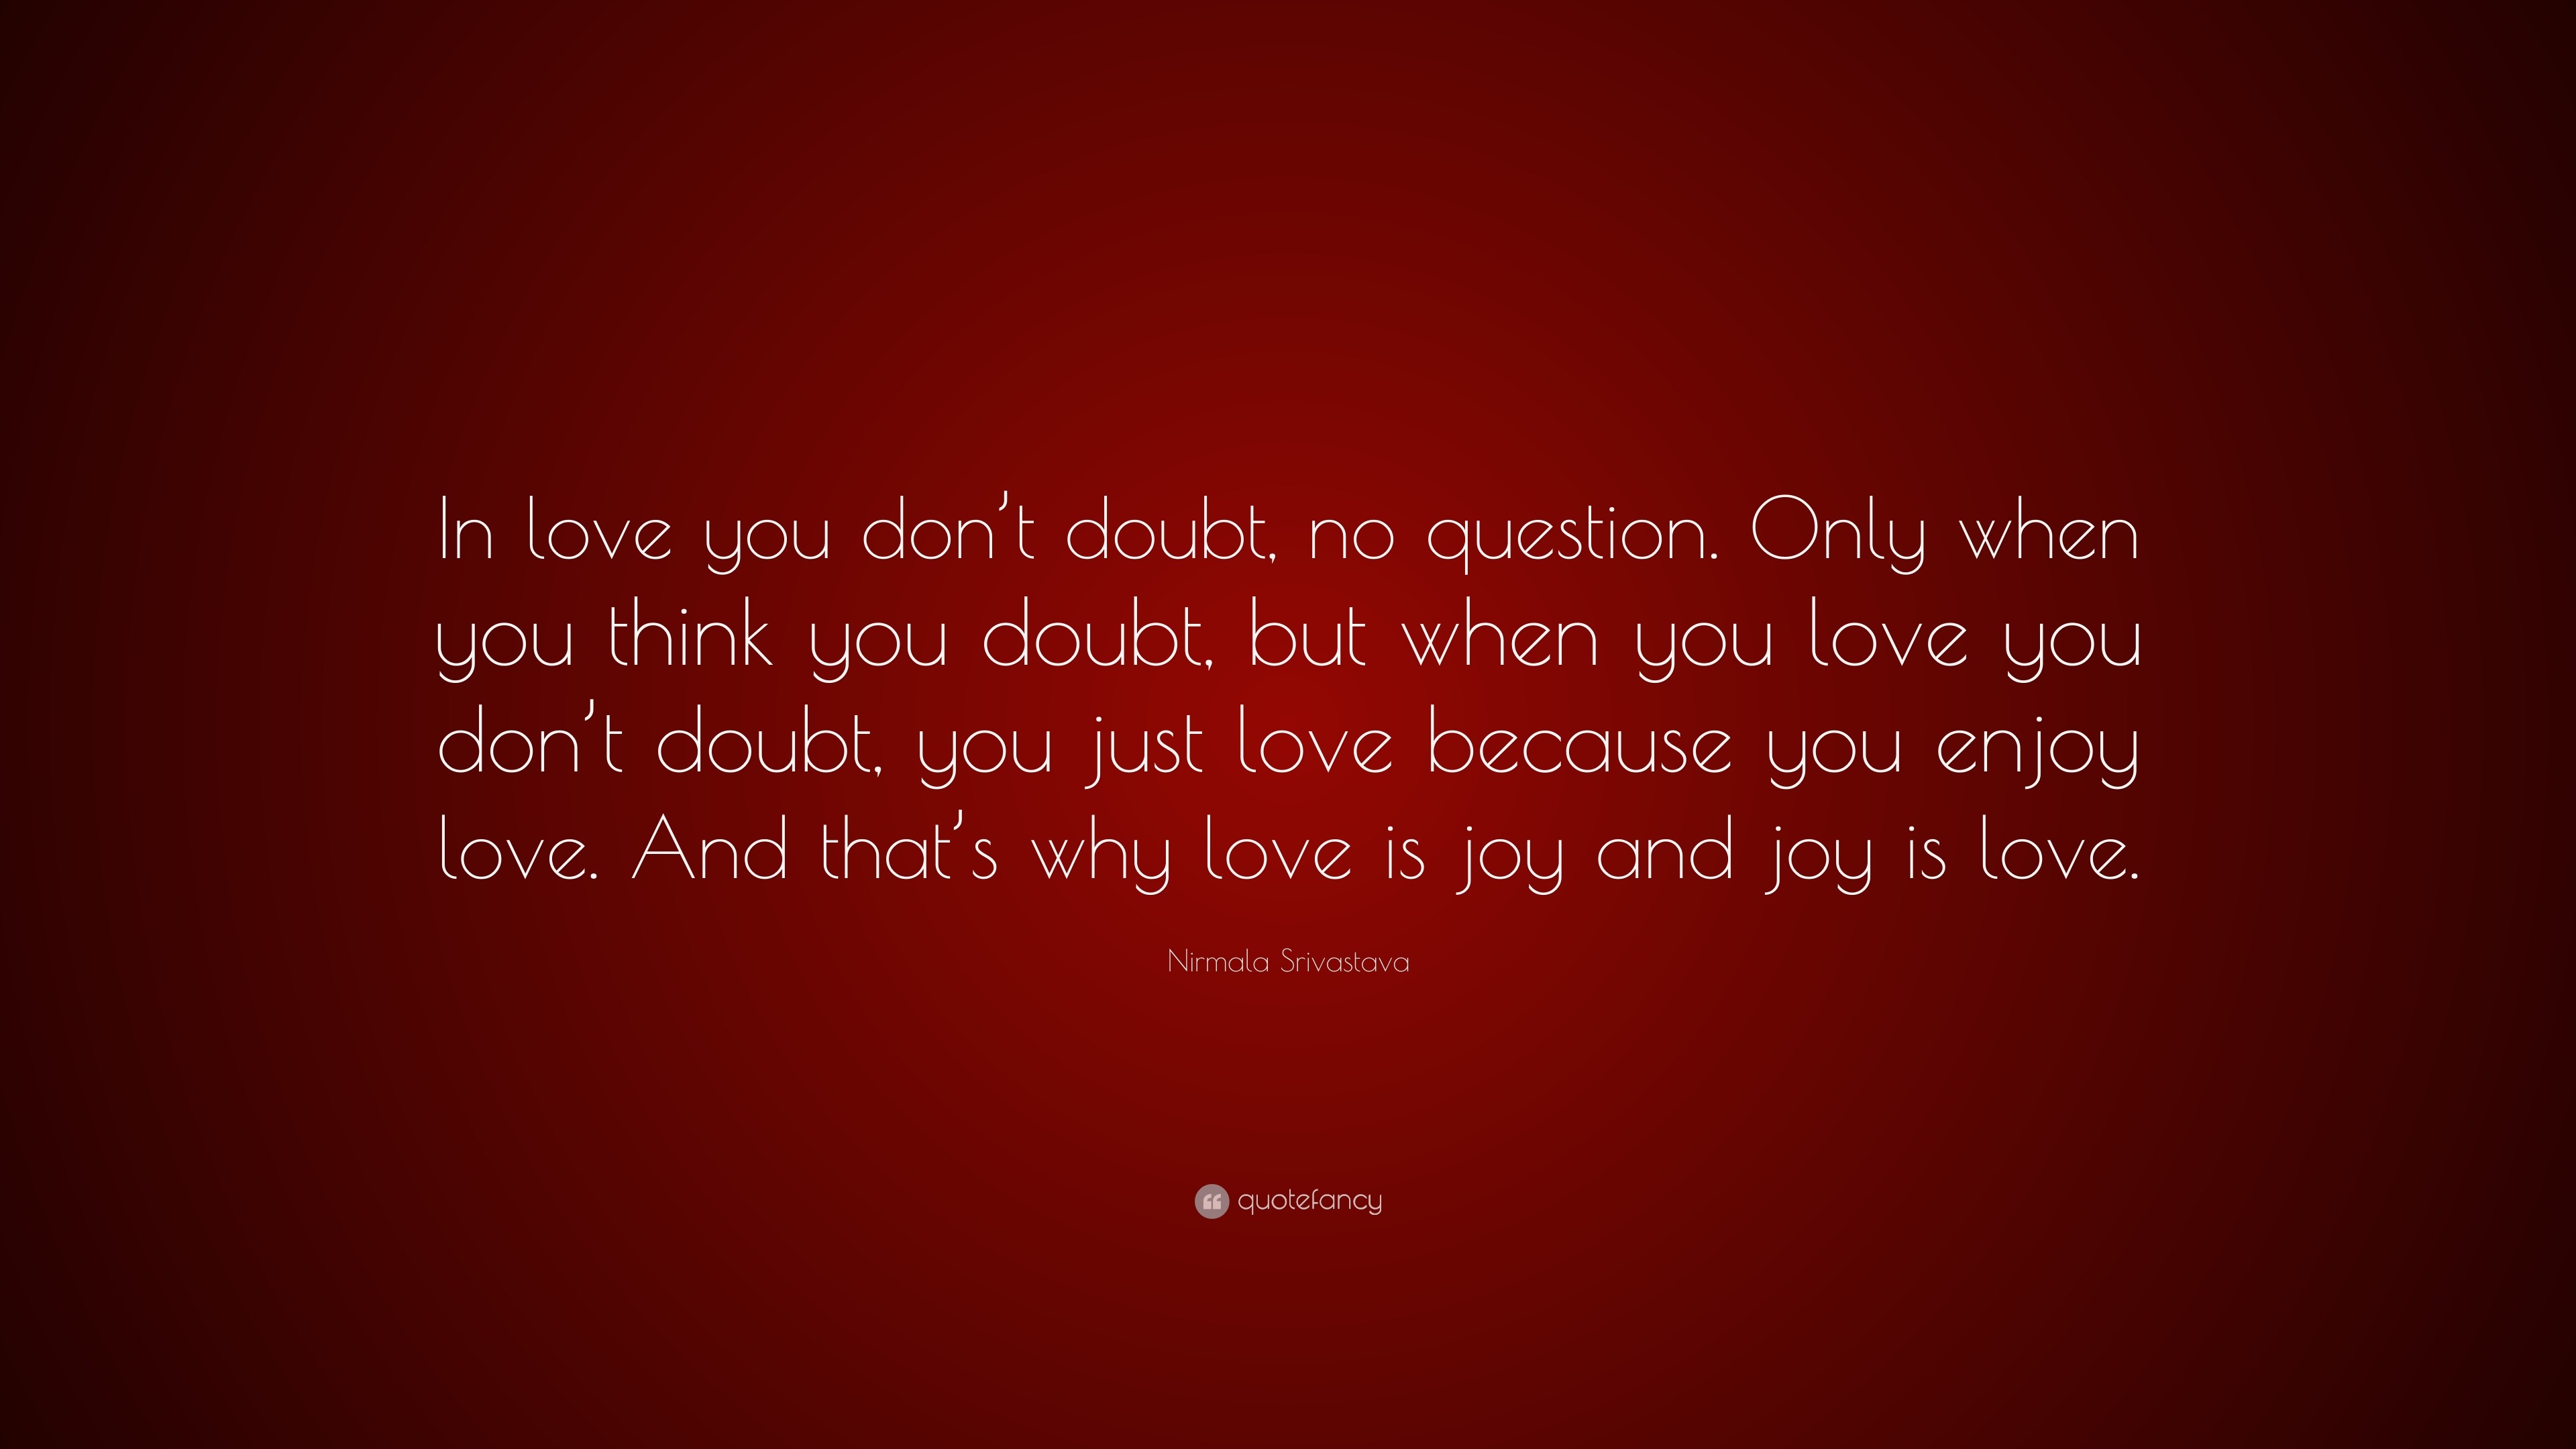 Nirmala Srivastava Quote “In love you don t doubt no question